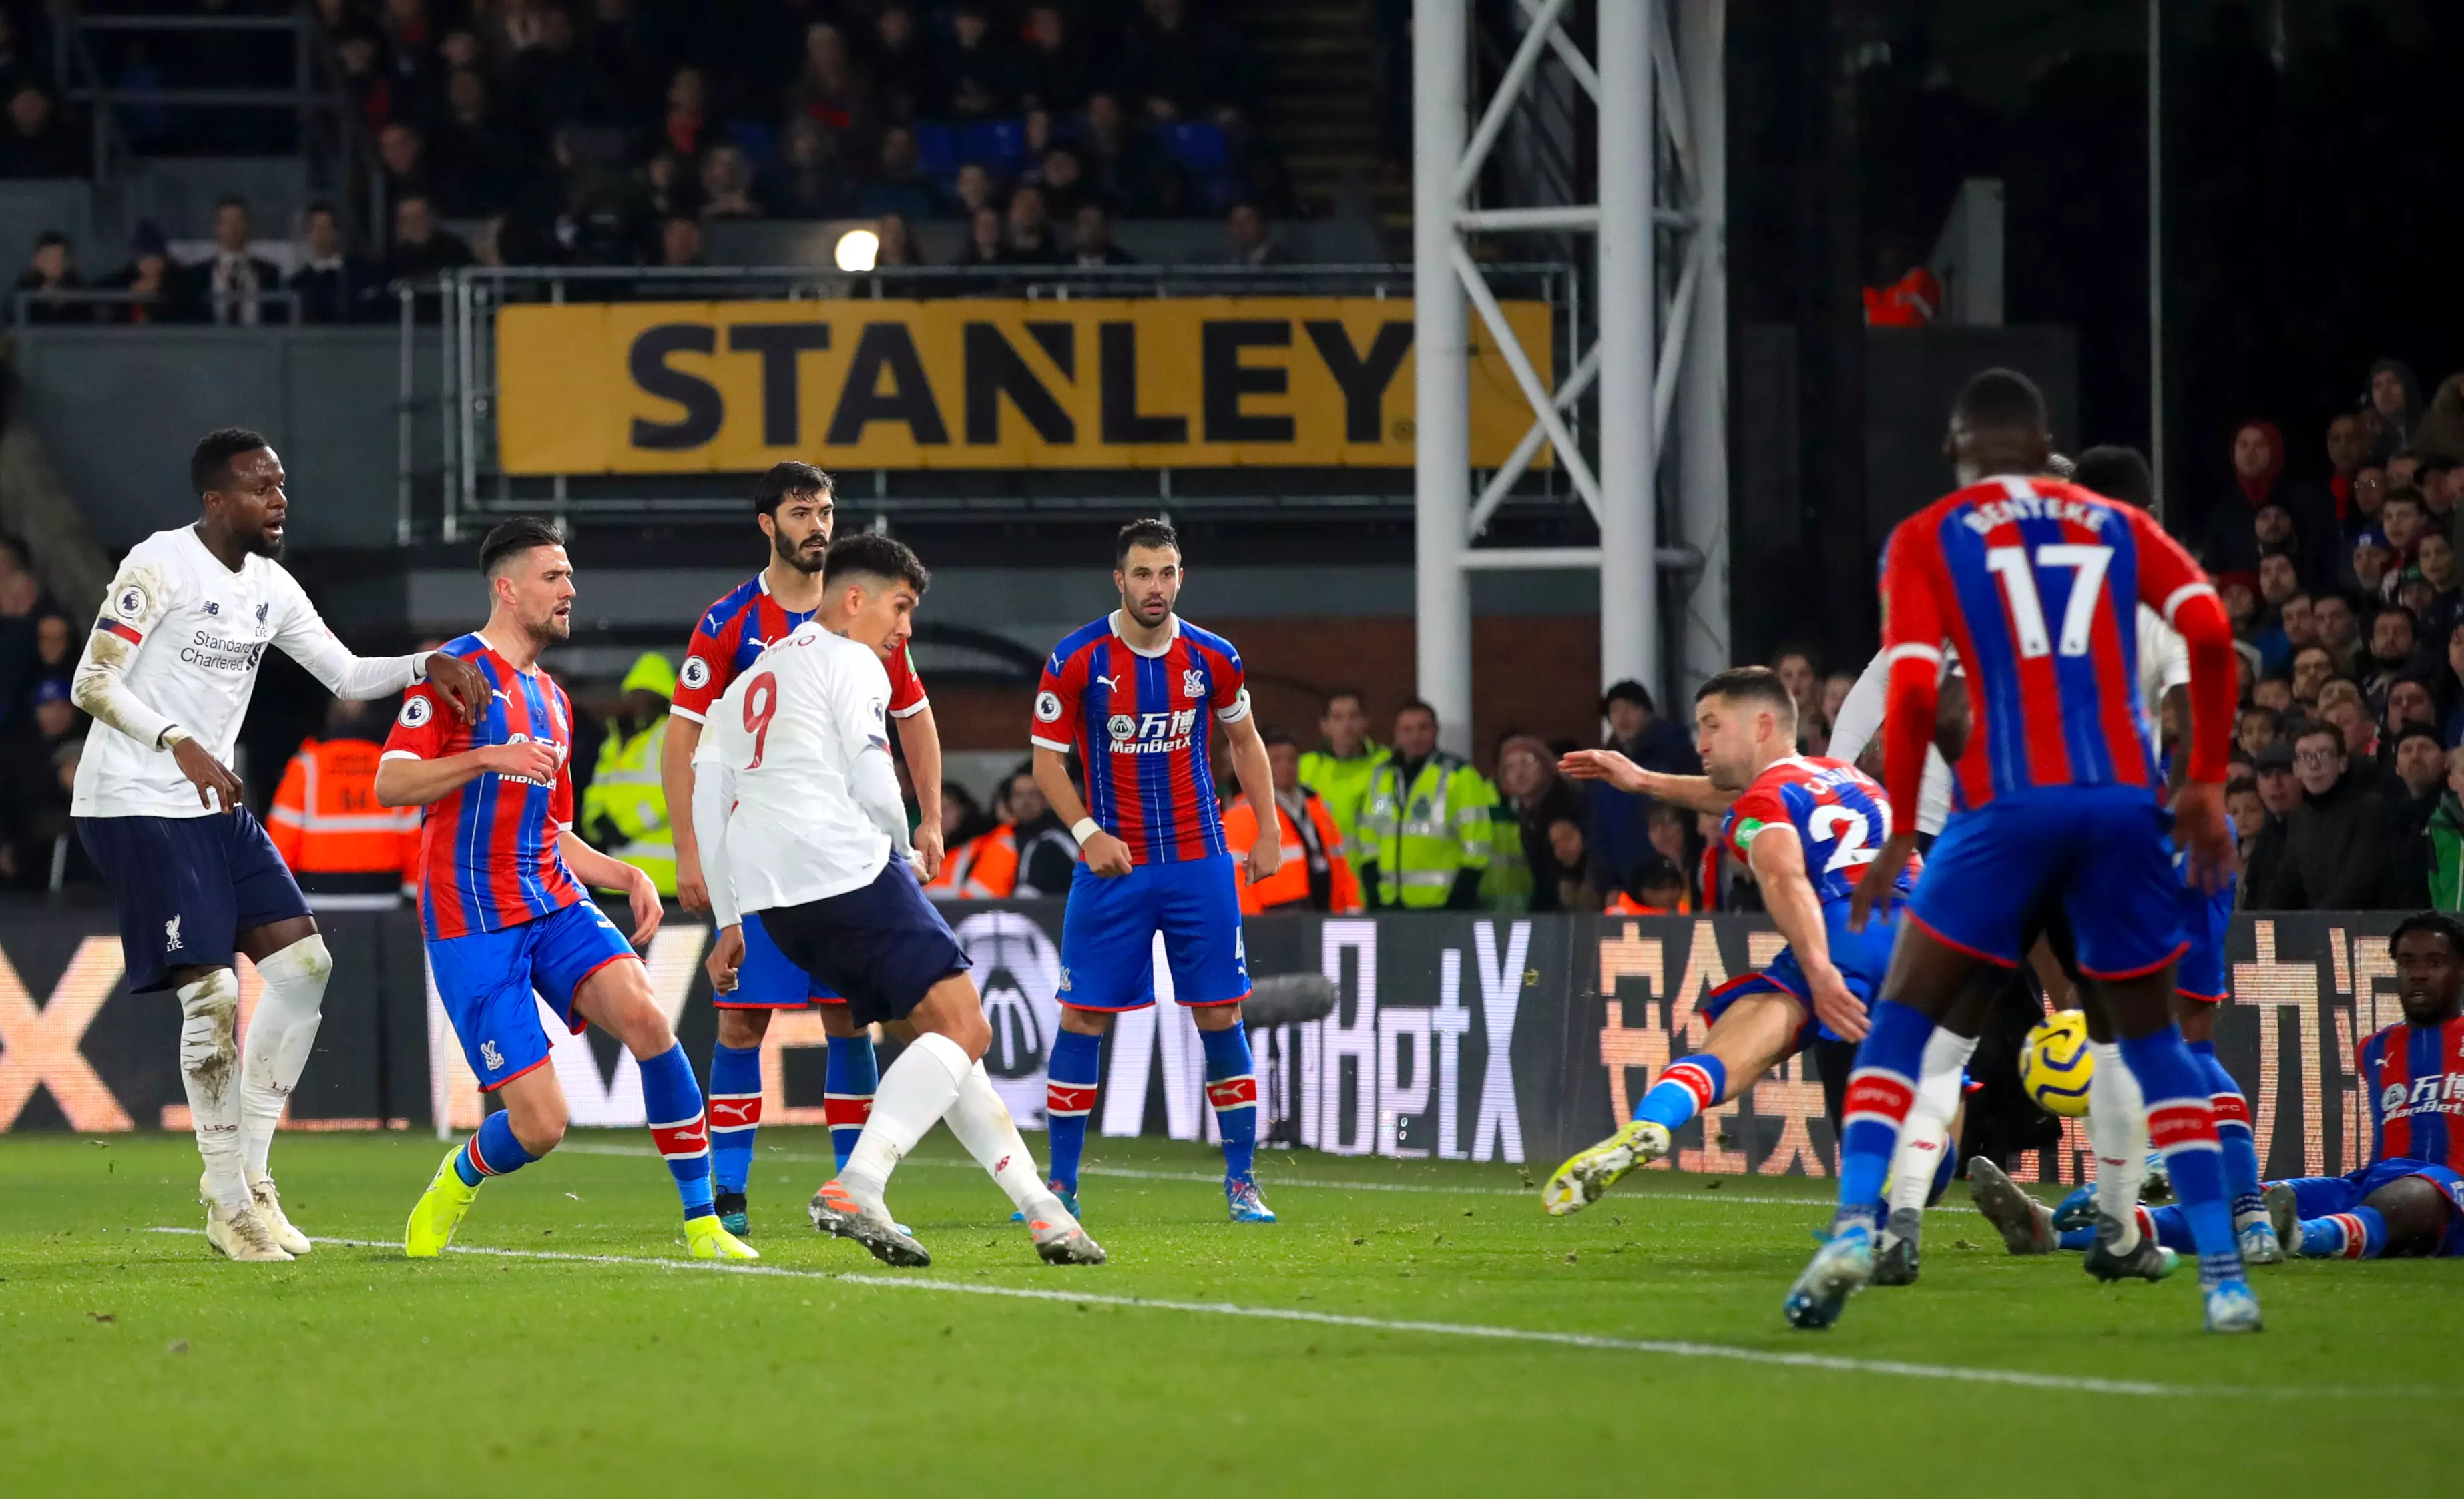 Roberto Firmino scored a late winner against Crystal Palace on Saturday to continue Liverpool's incredible start